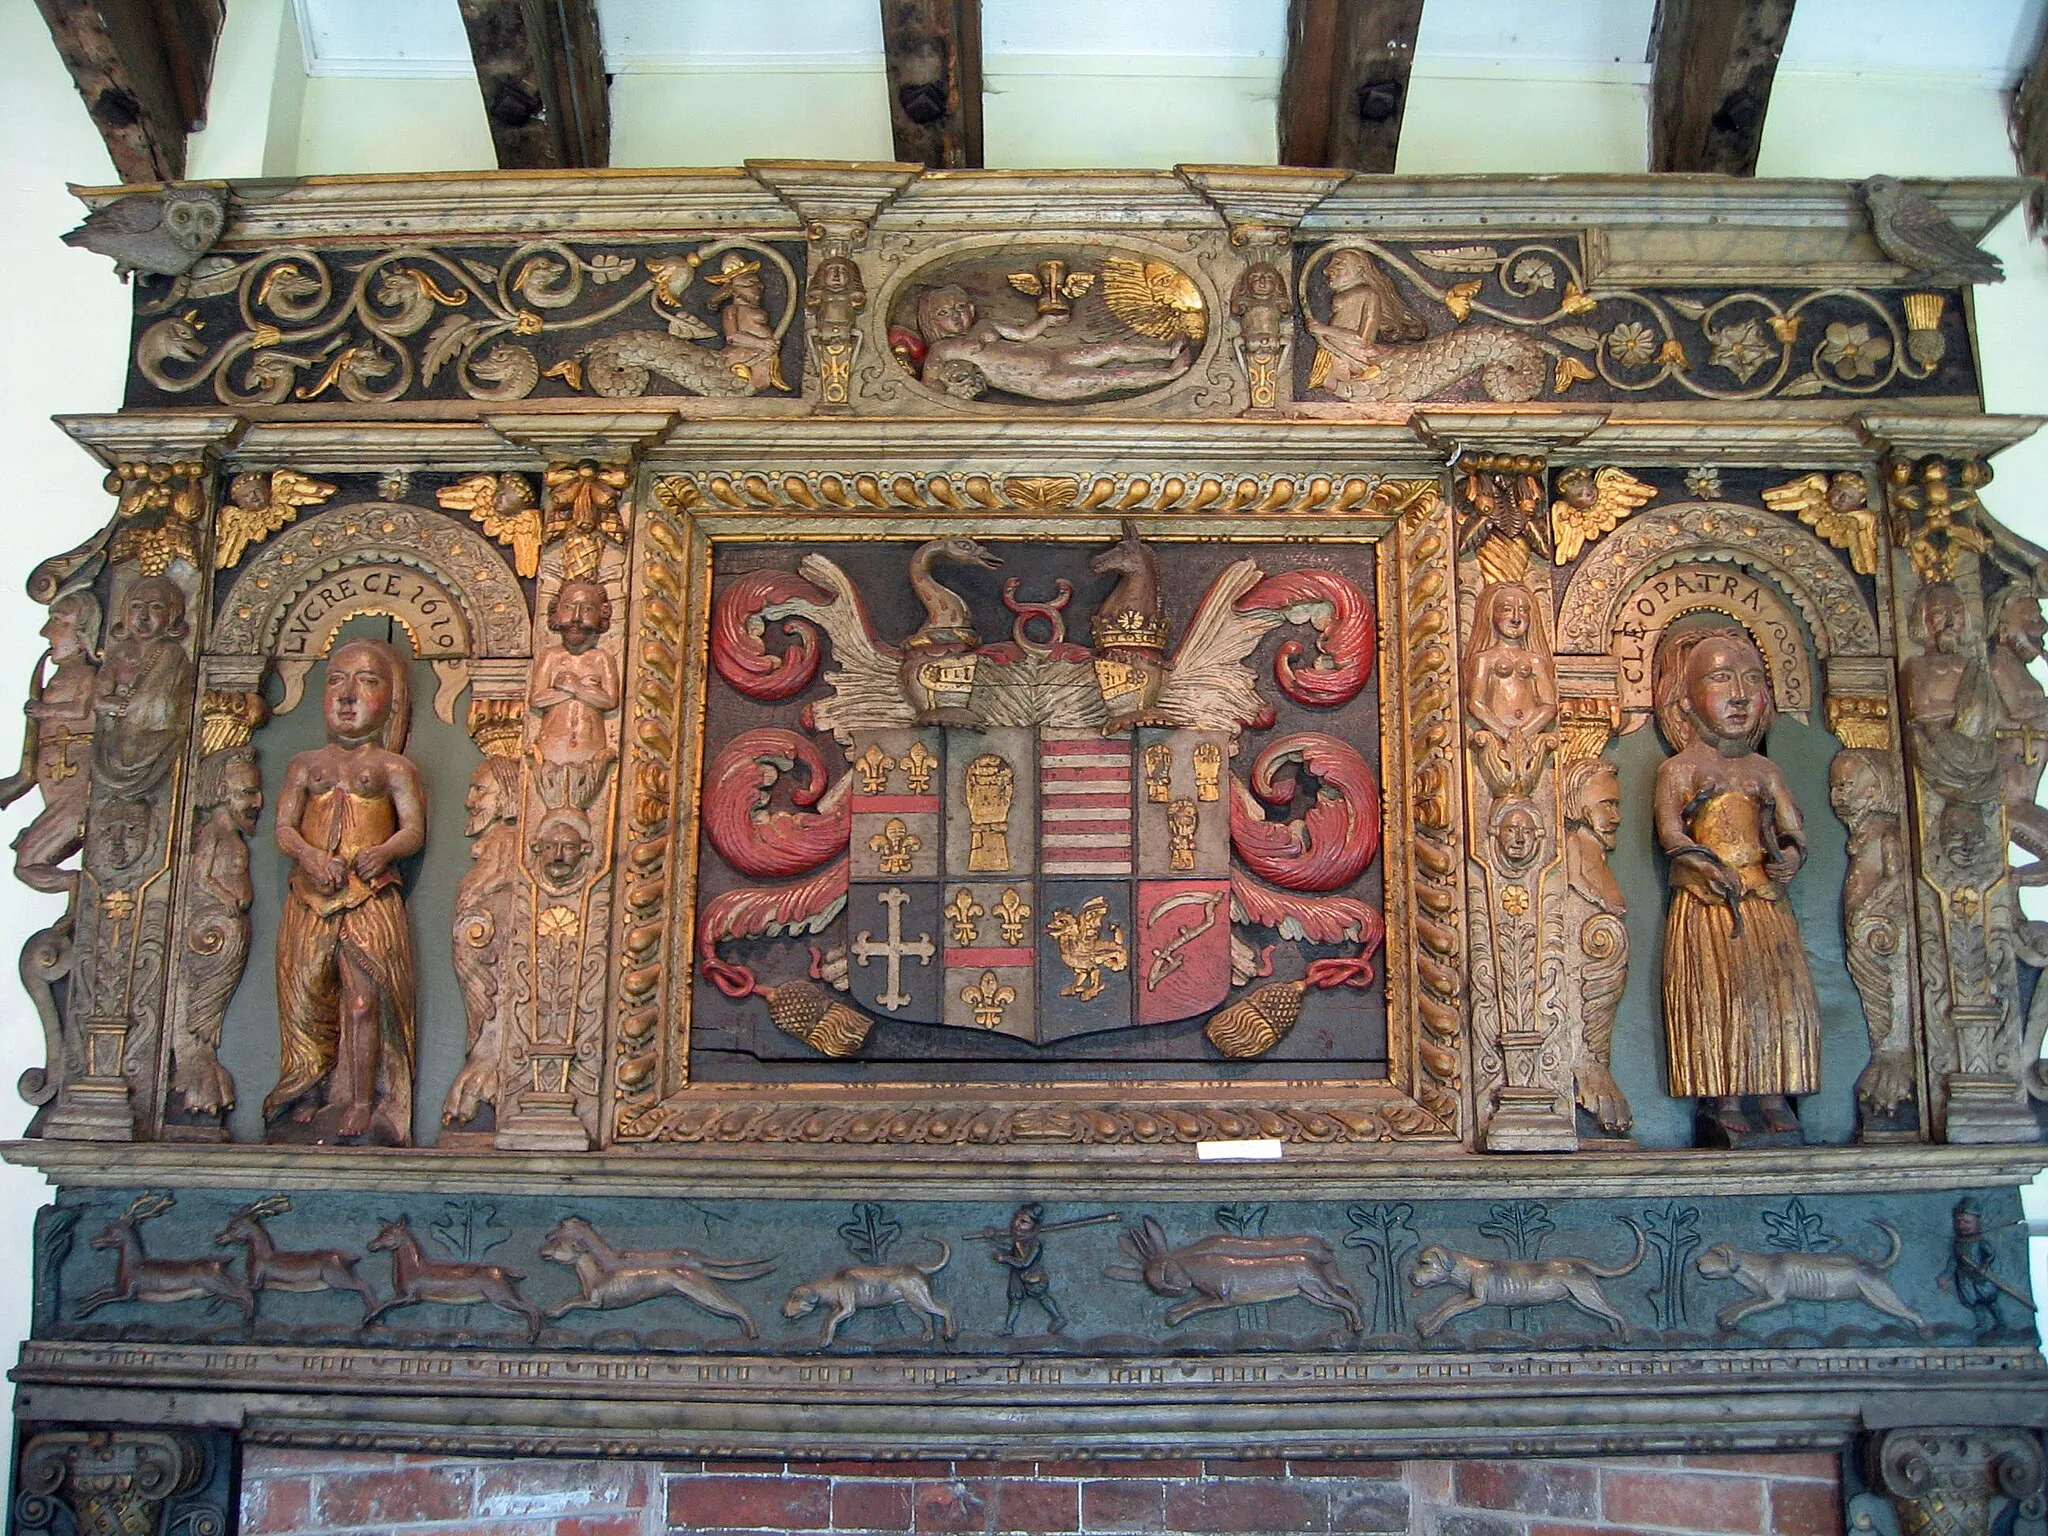 Photo showing: Chimney piece removed from Tabley Old Hall, Cheshire, now in the Old Hall Room at Tabley House. Built to memorialise the 1611 marriage of Peter Leycester (1588–1647) of Tabley to Elizabeth Mainwaring, a daughter of Sir Randle Mainwaring of Over Peover, Cheshire. The arms show Leycester (Azure, a fess gules between three fleurs-de-lys or) of four quarters, impaling Mainwaring (Barry of twelve argent and gules) of four quarters. The arms of Leycester are a known contravention of the heraldic "rule of tinctures".( Encyclopaedia Britannica, 1902, 9th and 10th editions, "Heraldry"[1])[2]